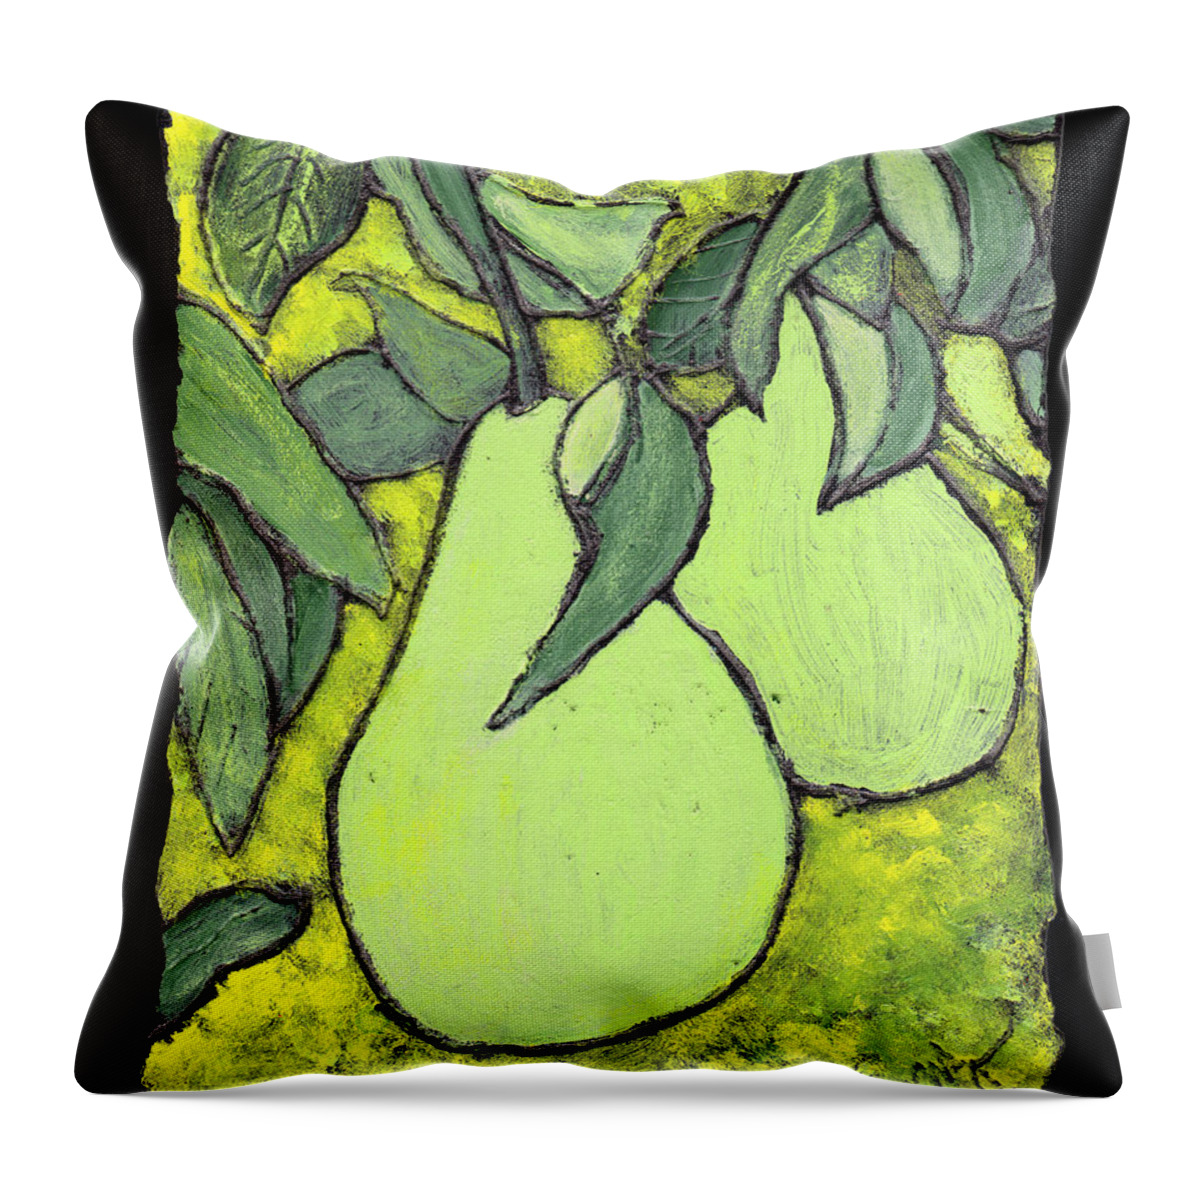 Pears Throw Pillow featuring the painting Michigan Pears by Wayne Potrafka